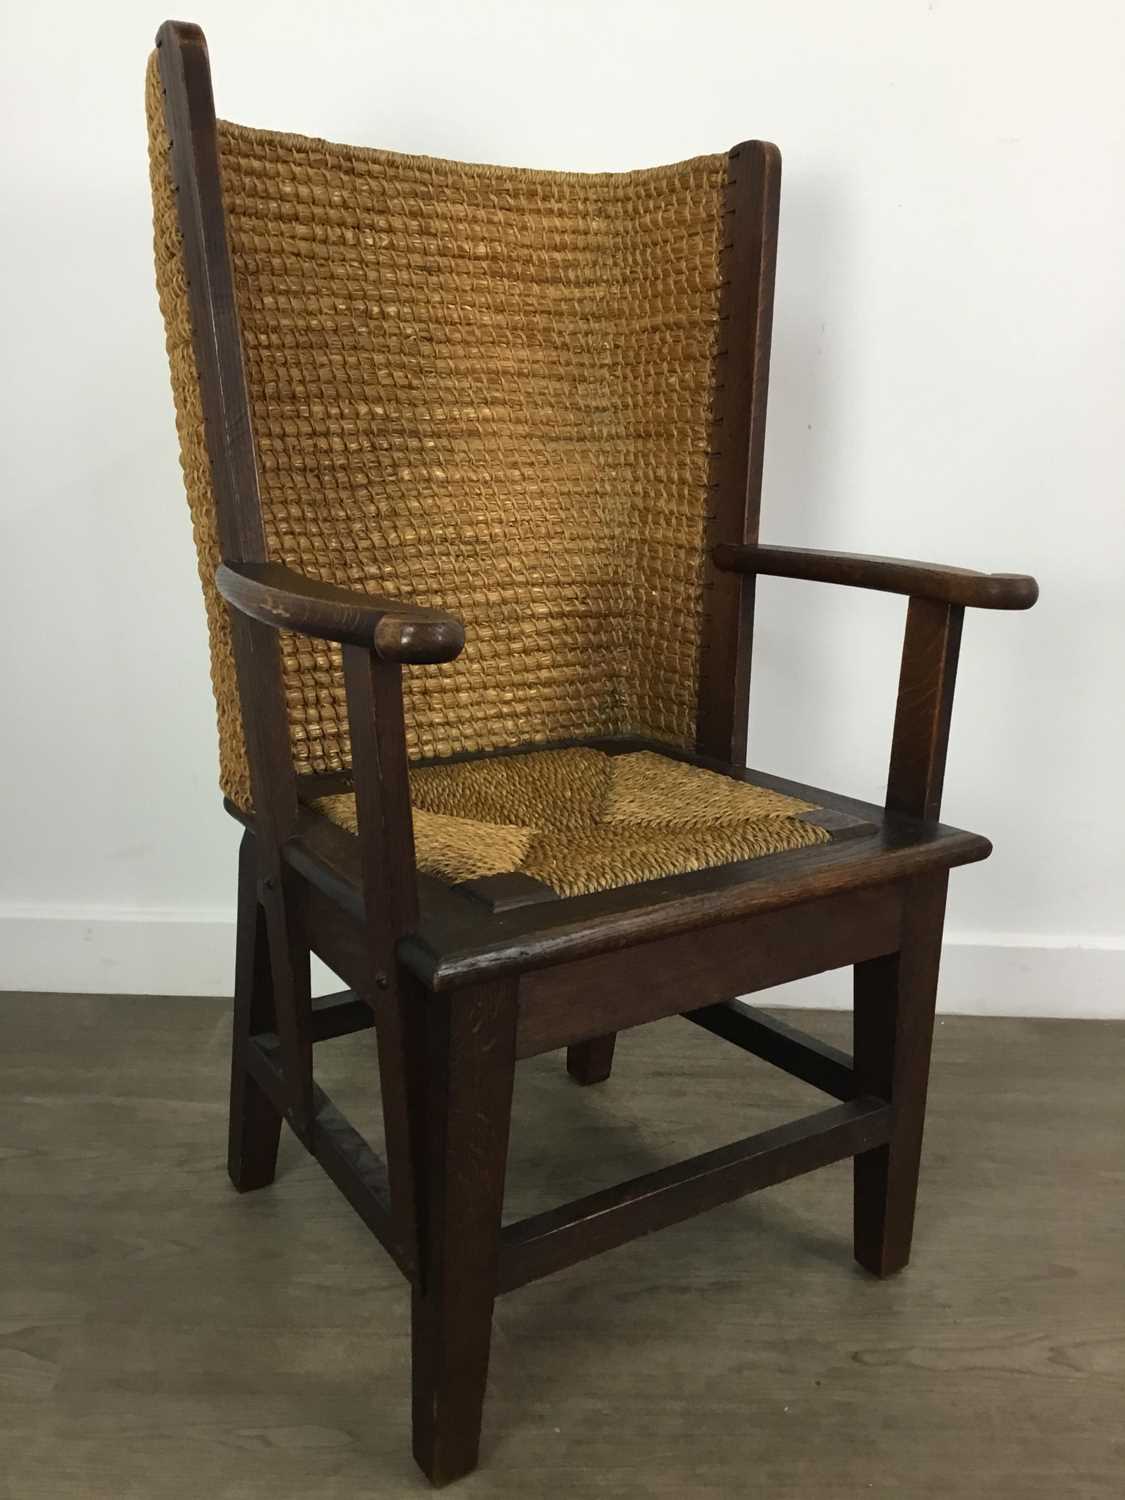 PAIR OF OAK ORKNEY CHAIRS, EARLY 20TH CENTURY